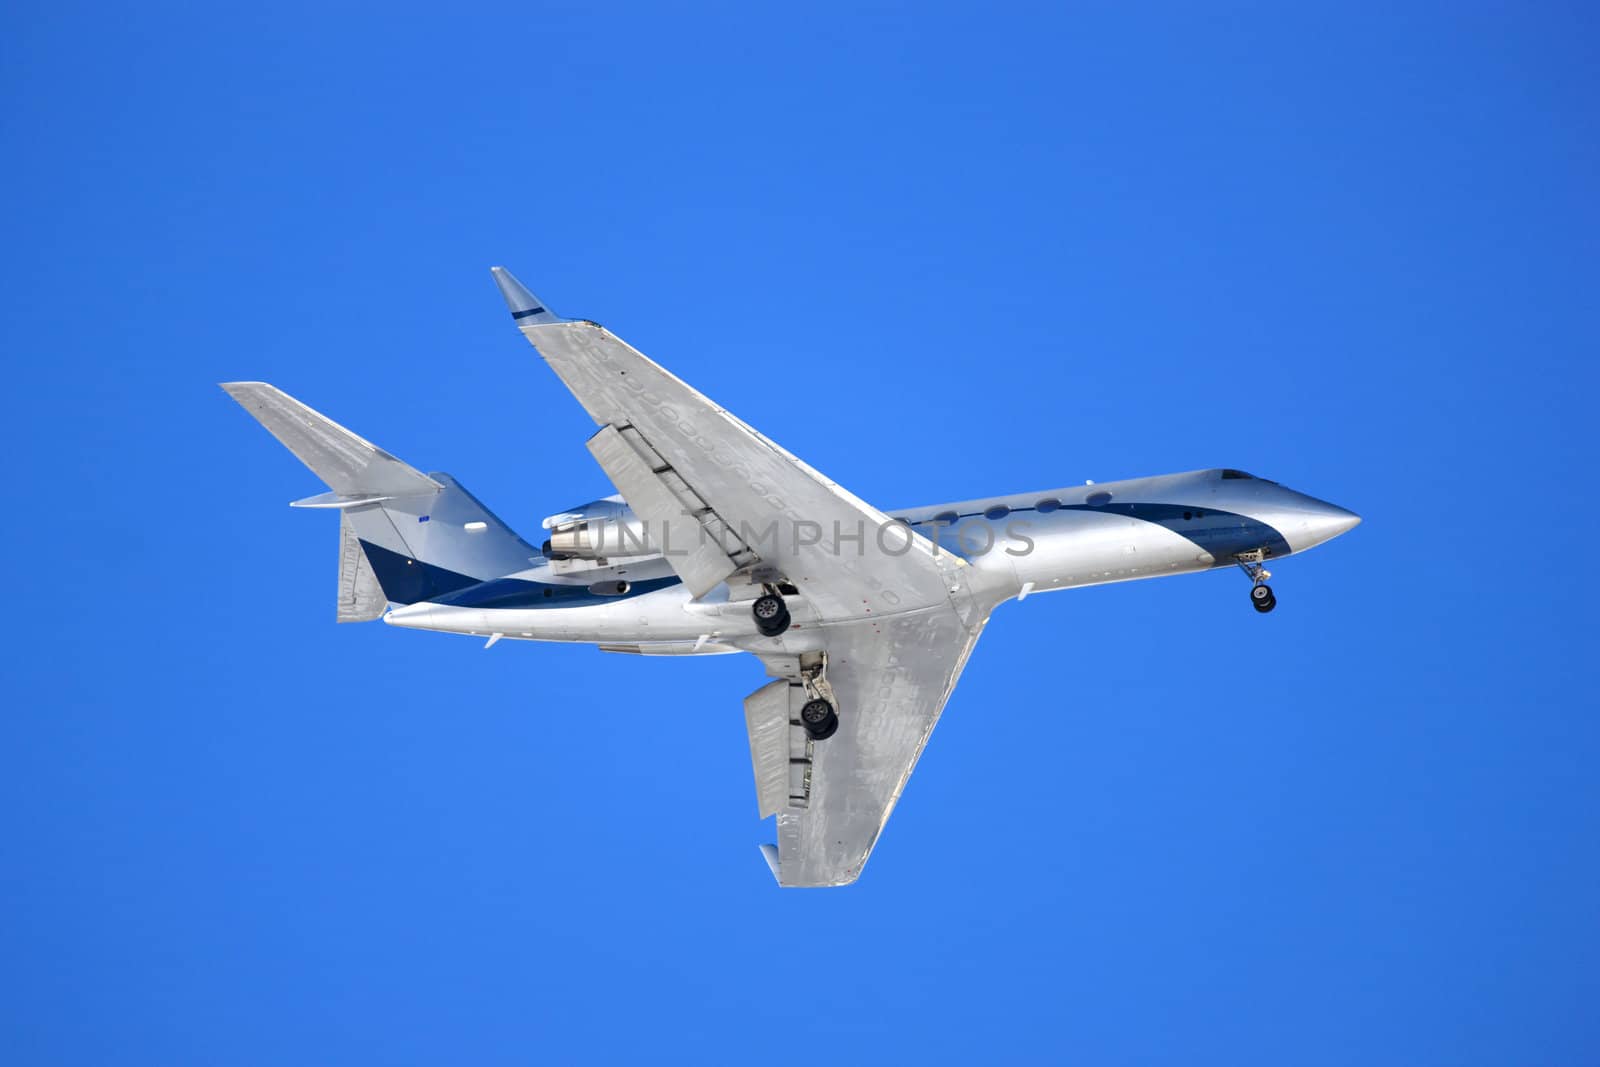 Aeroplane on a blue background by monner